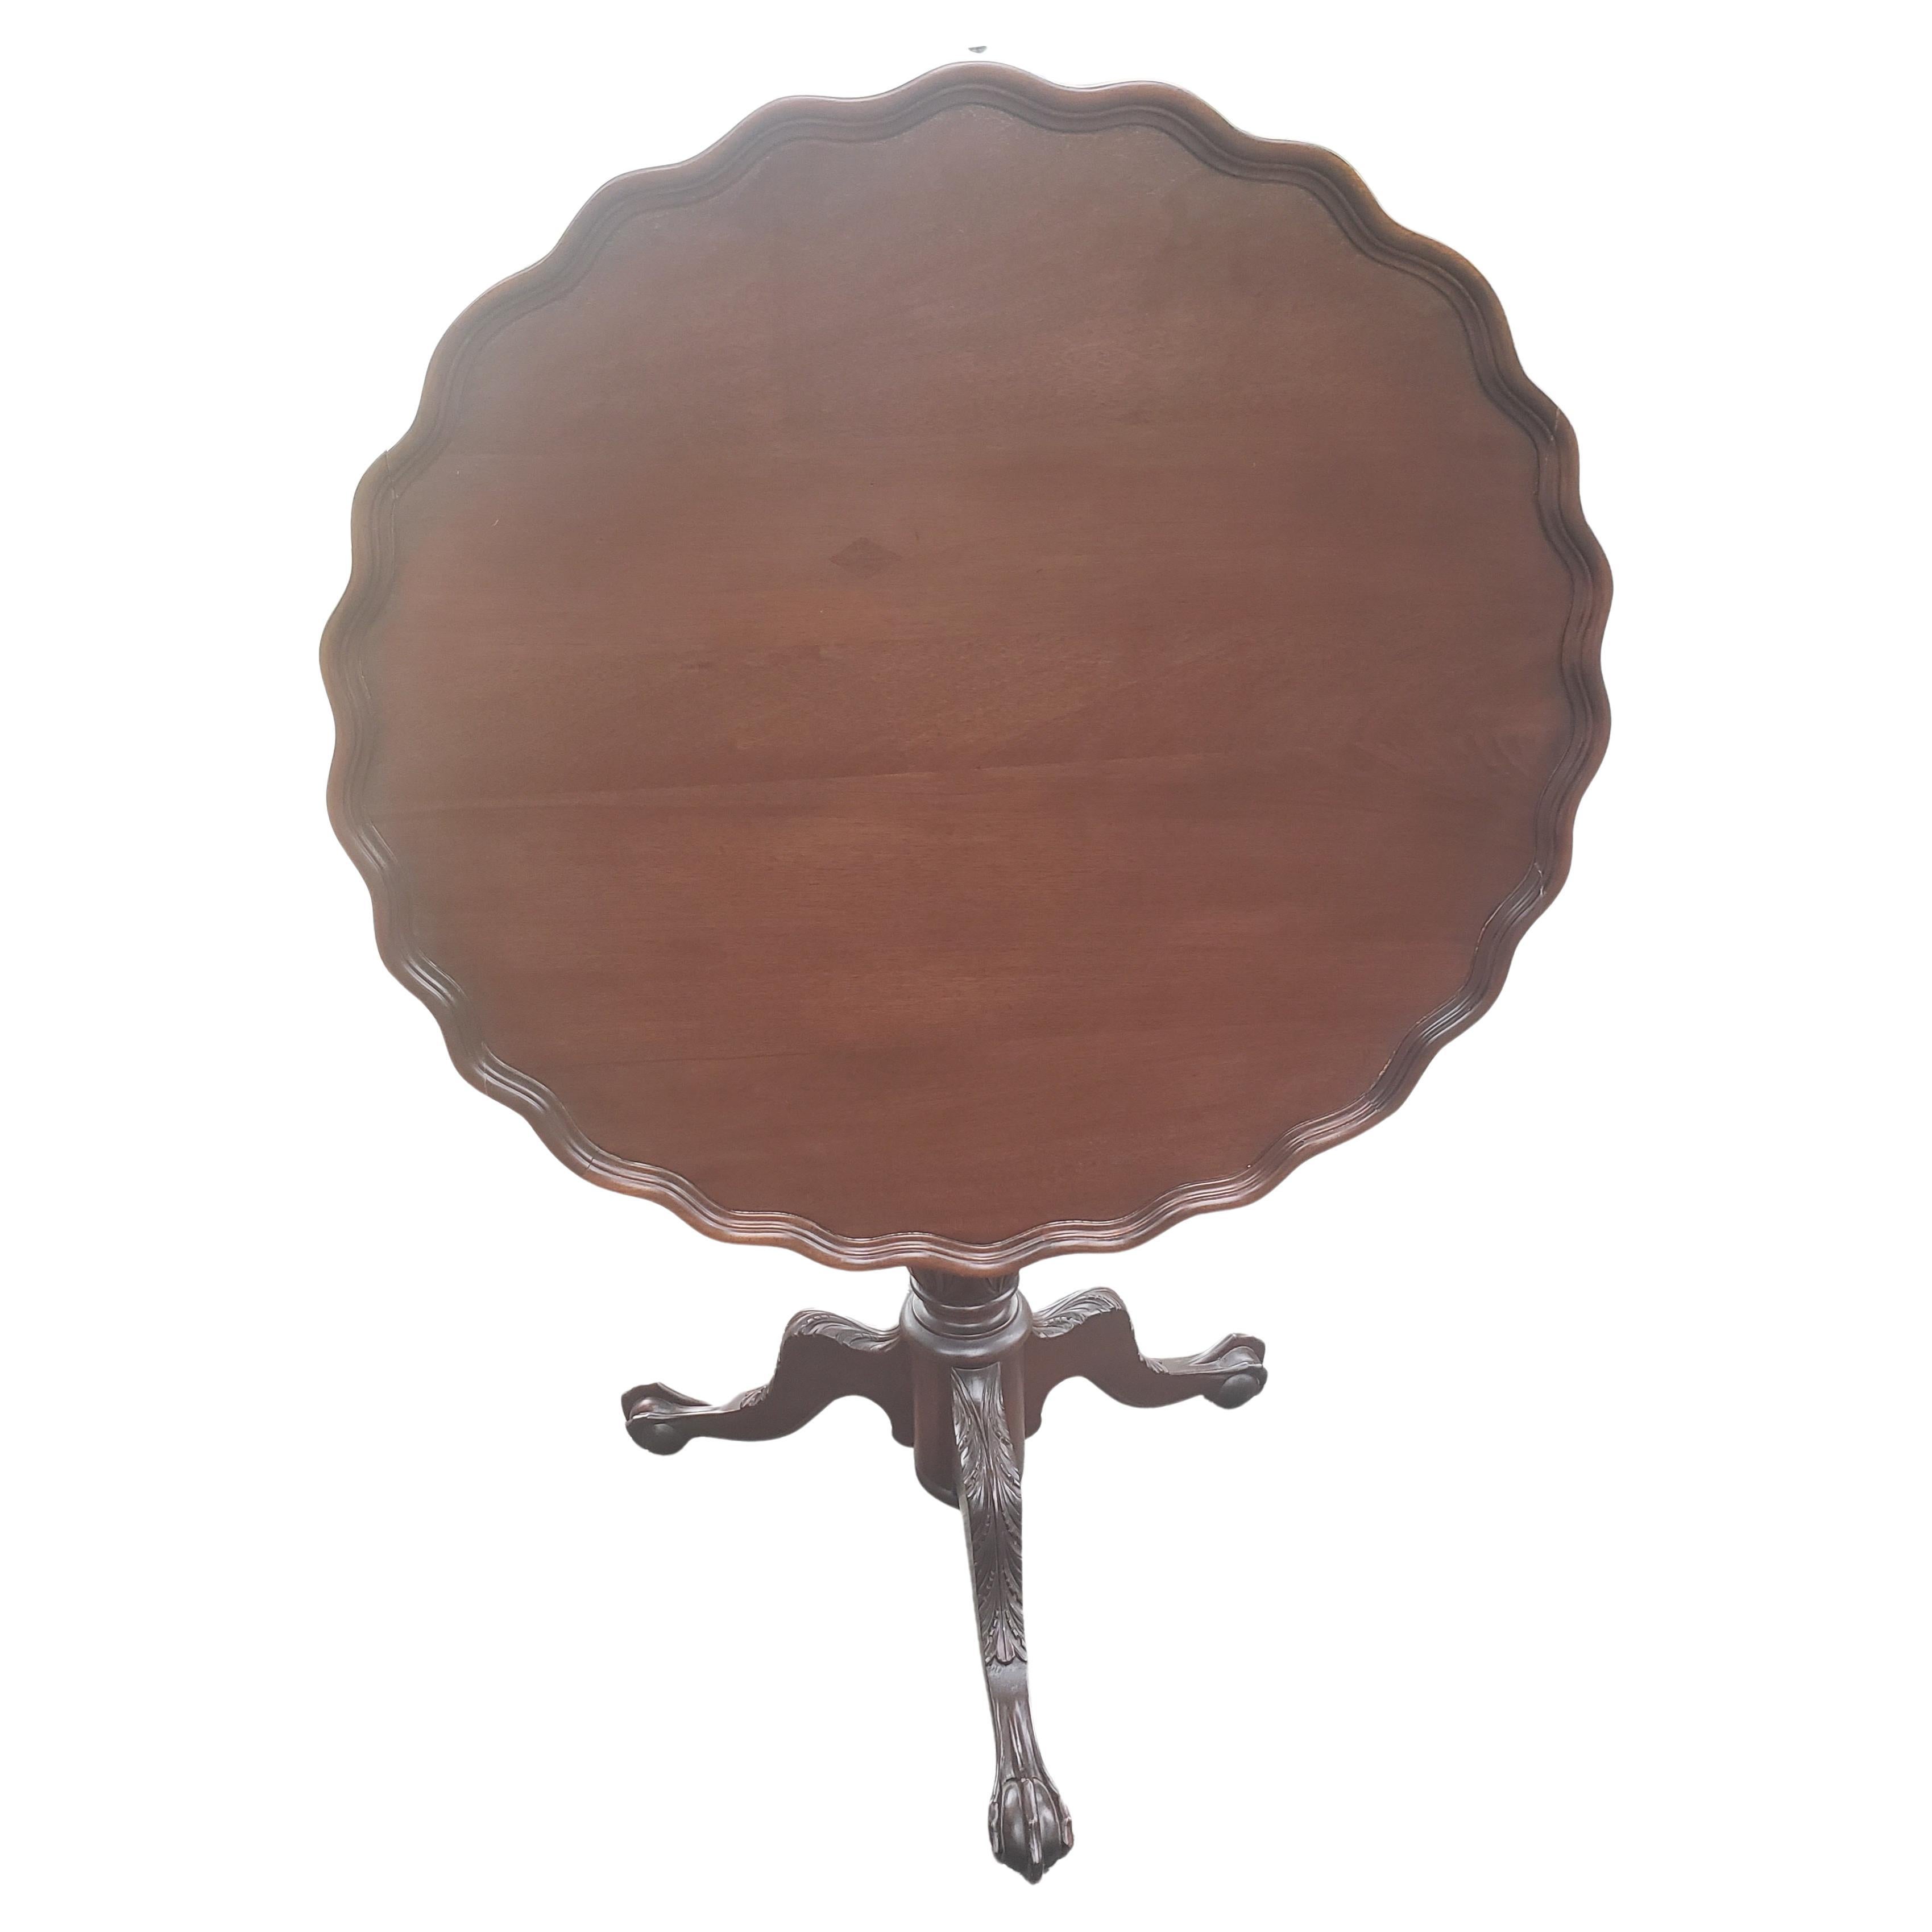 Exquisite antique tilt top pie crust pedestal mahogany tea table / center table in very good vintage condition from the 1930s. Large pie crust top over a hand carved pedestal supported by carved acanthus leaves and terminating with ball and claw